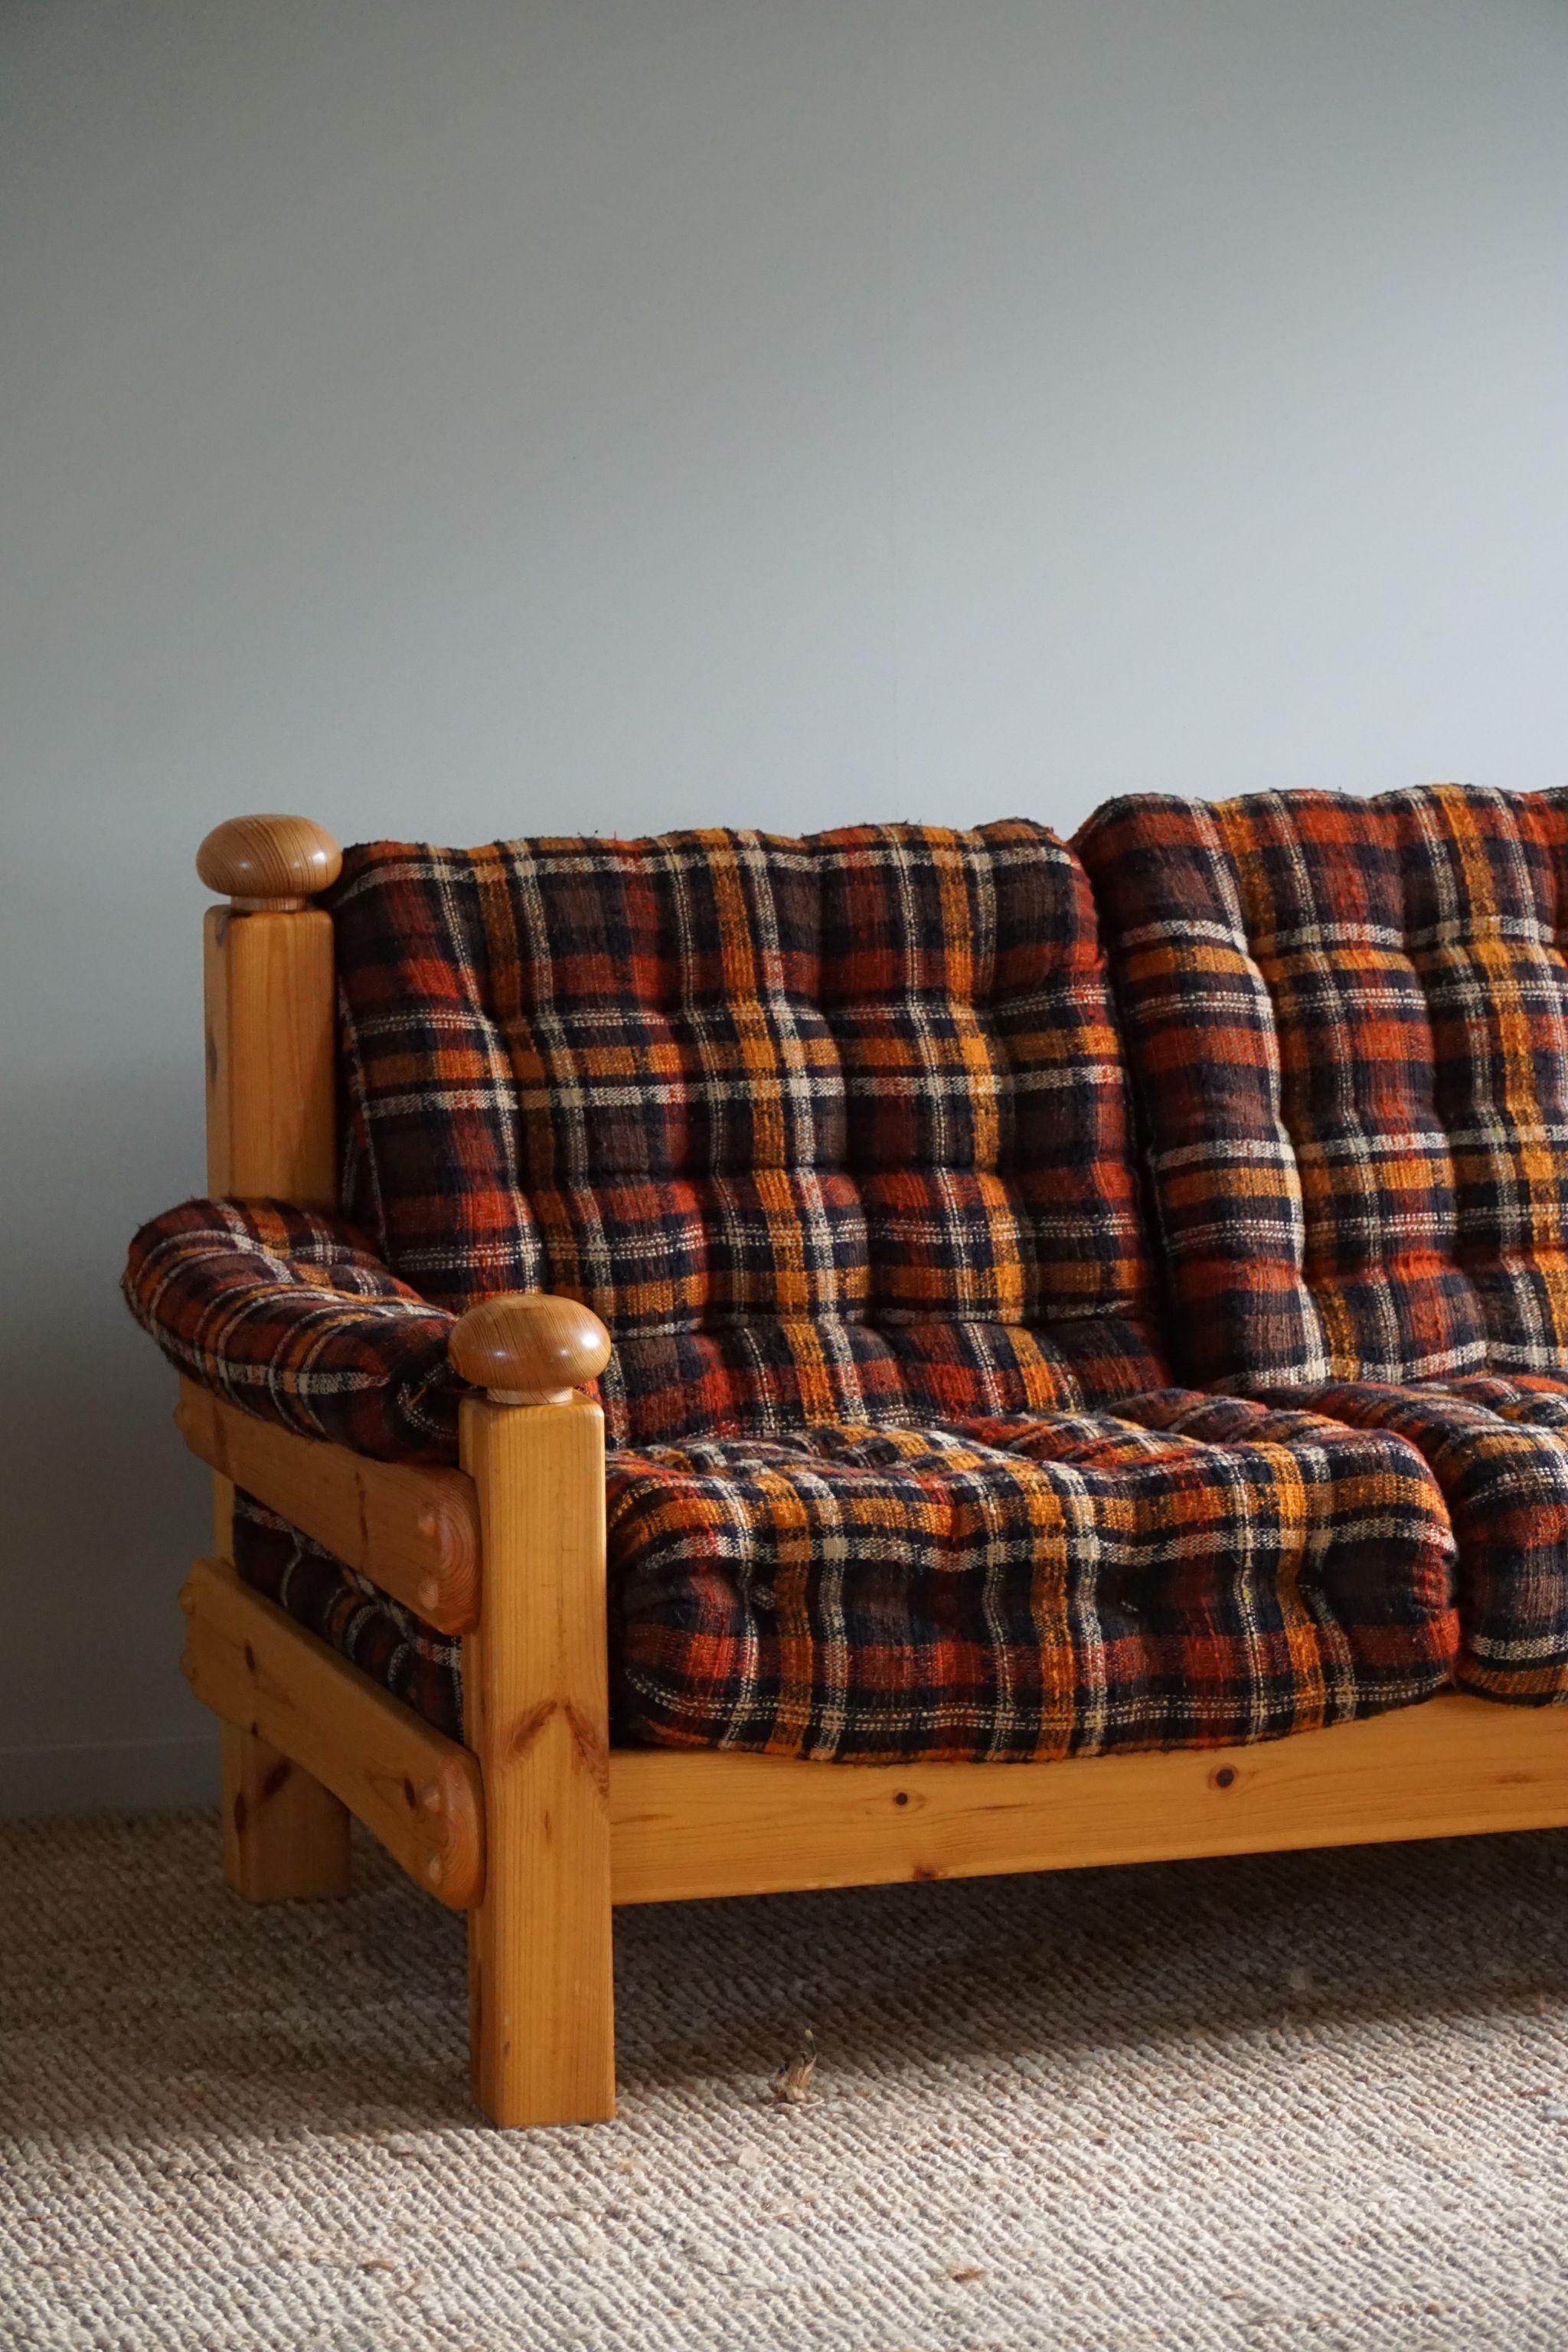 Three Seater Brutalist Sofa in Solid Pine, Swedish Modern, Made in the 1970s For Sale 12